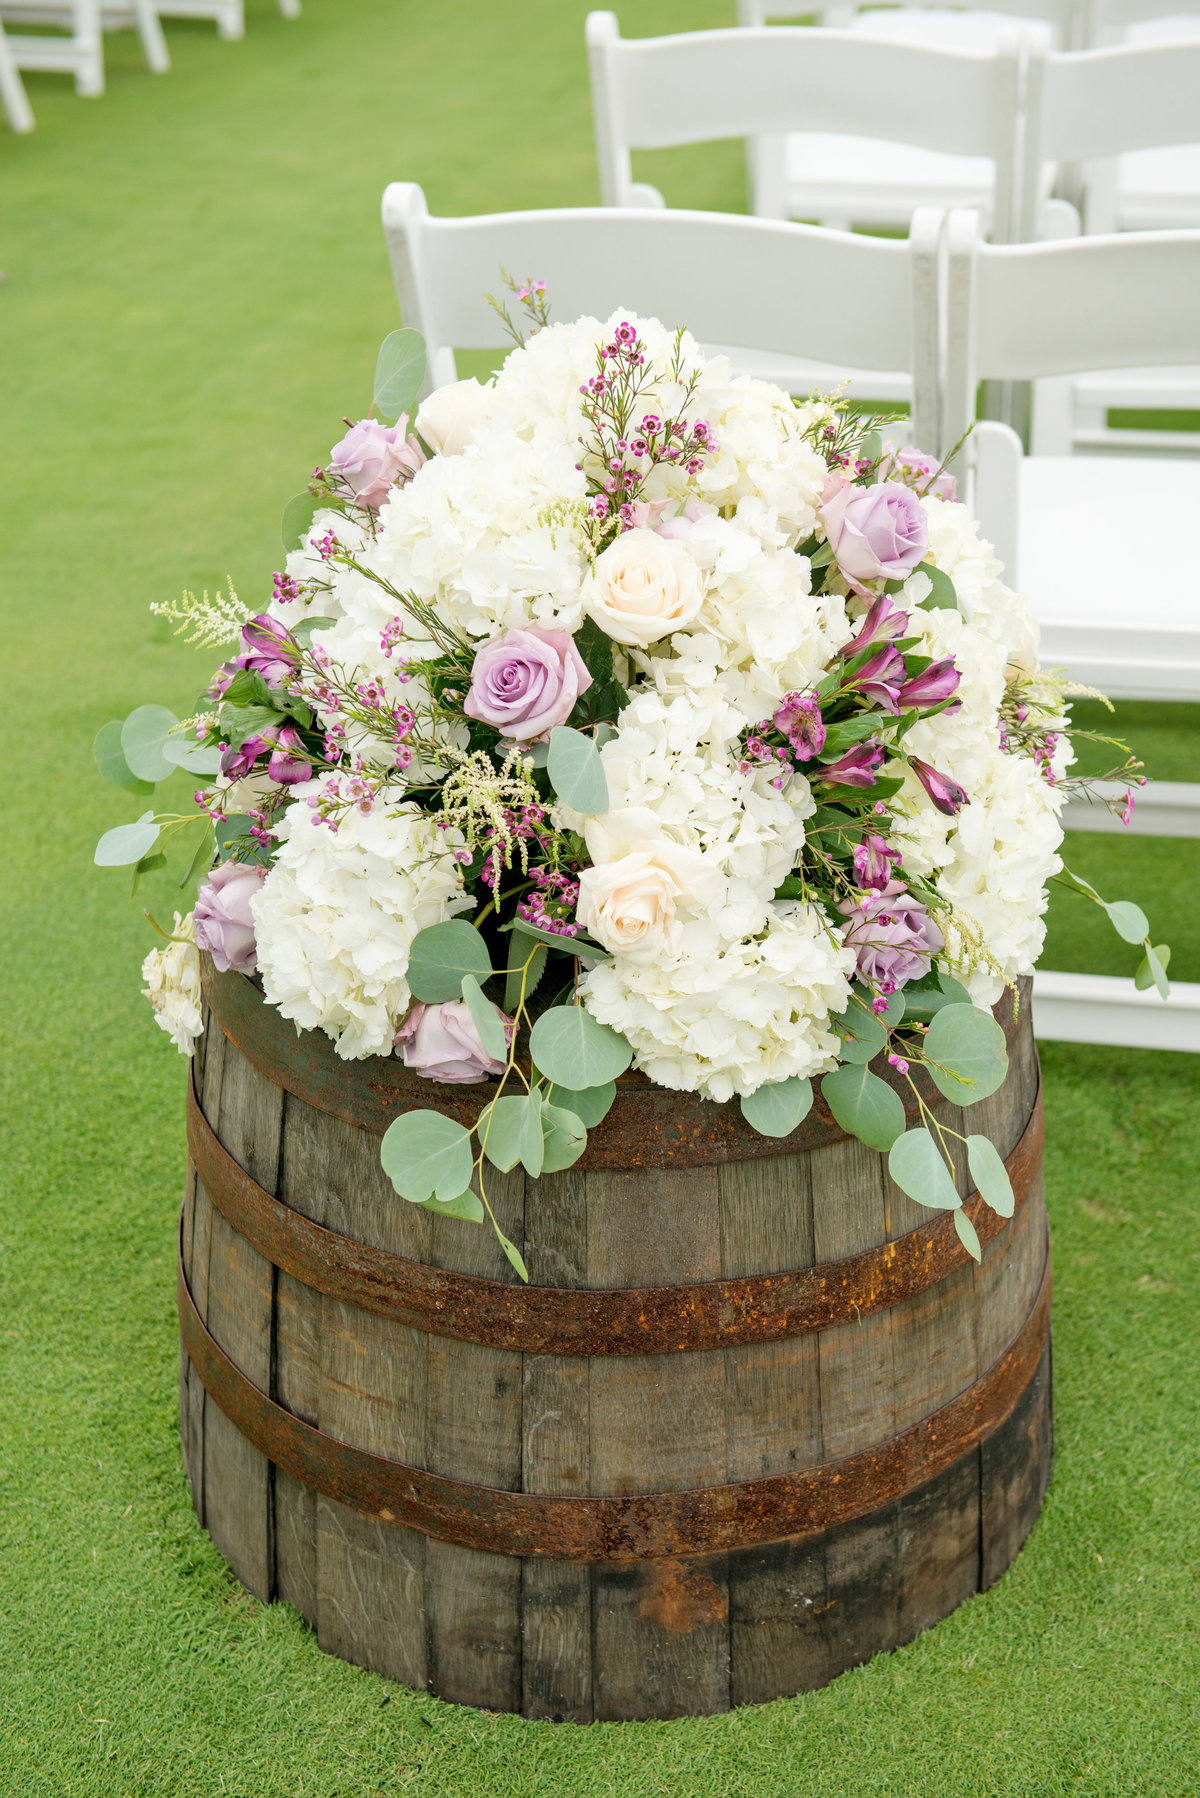 flowers and decoration from wedding ceremony at Willow Creek Golf and Country Club